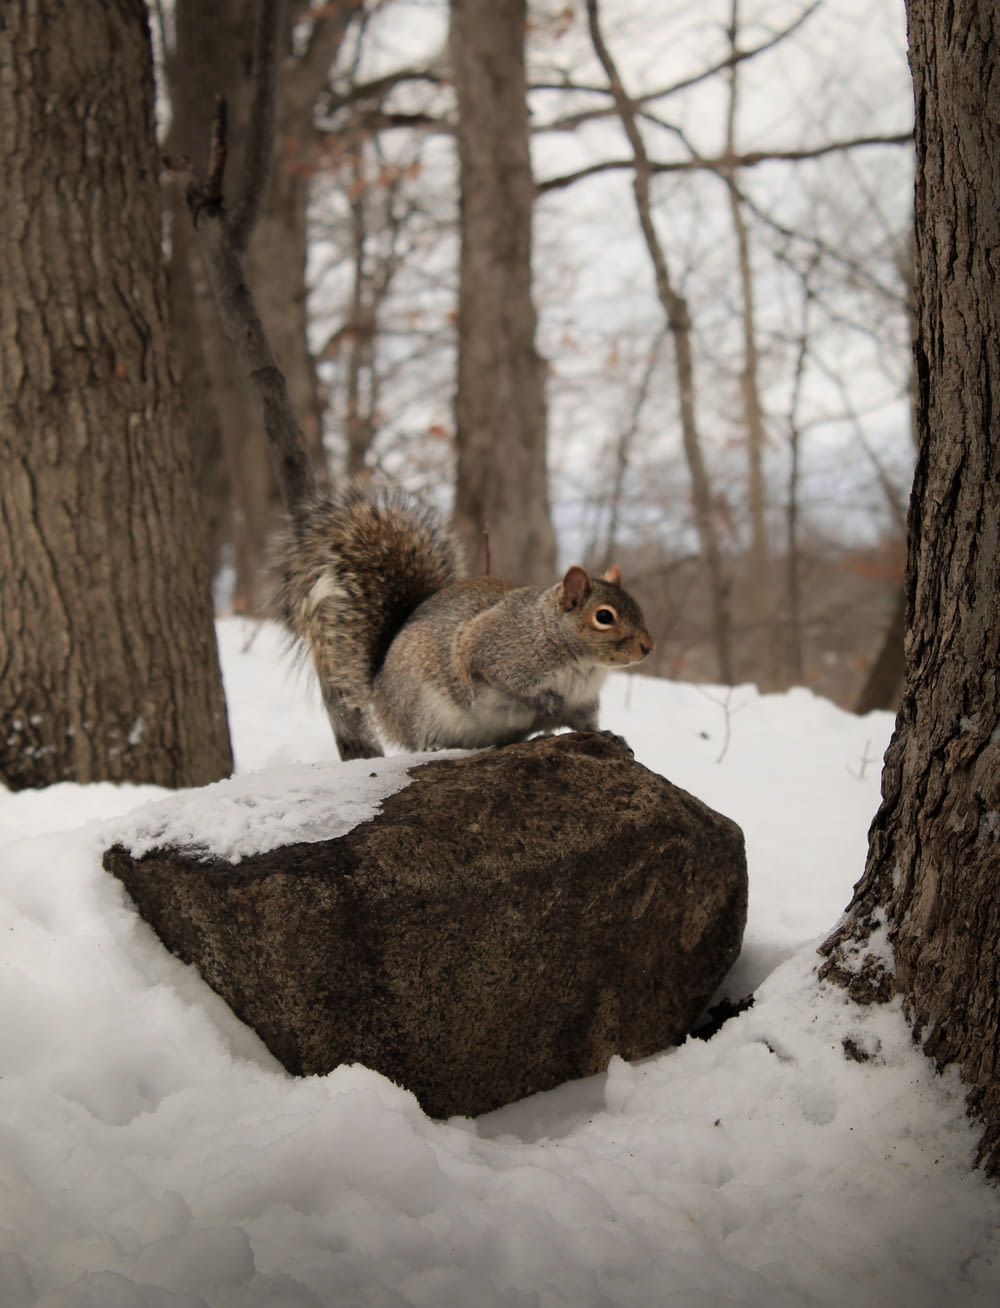 a squirrel is standing on a rock in the snow